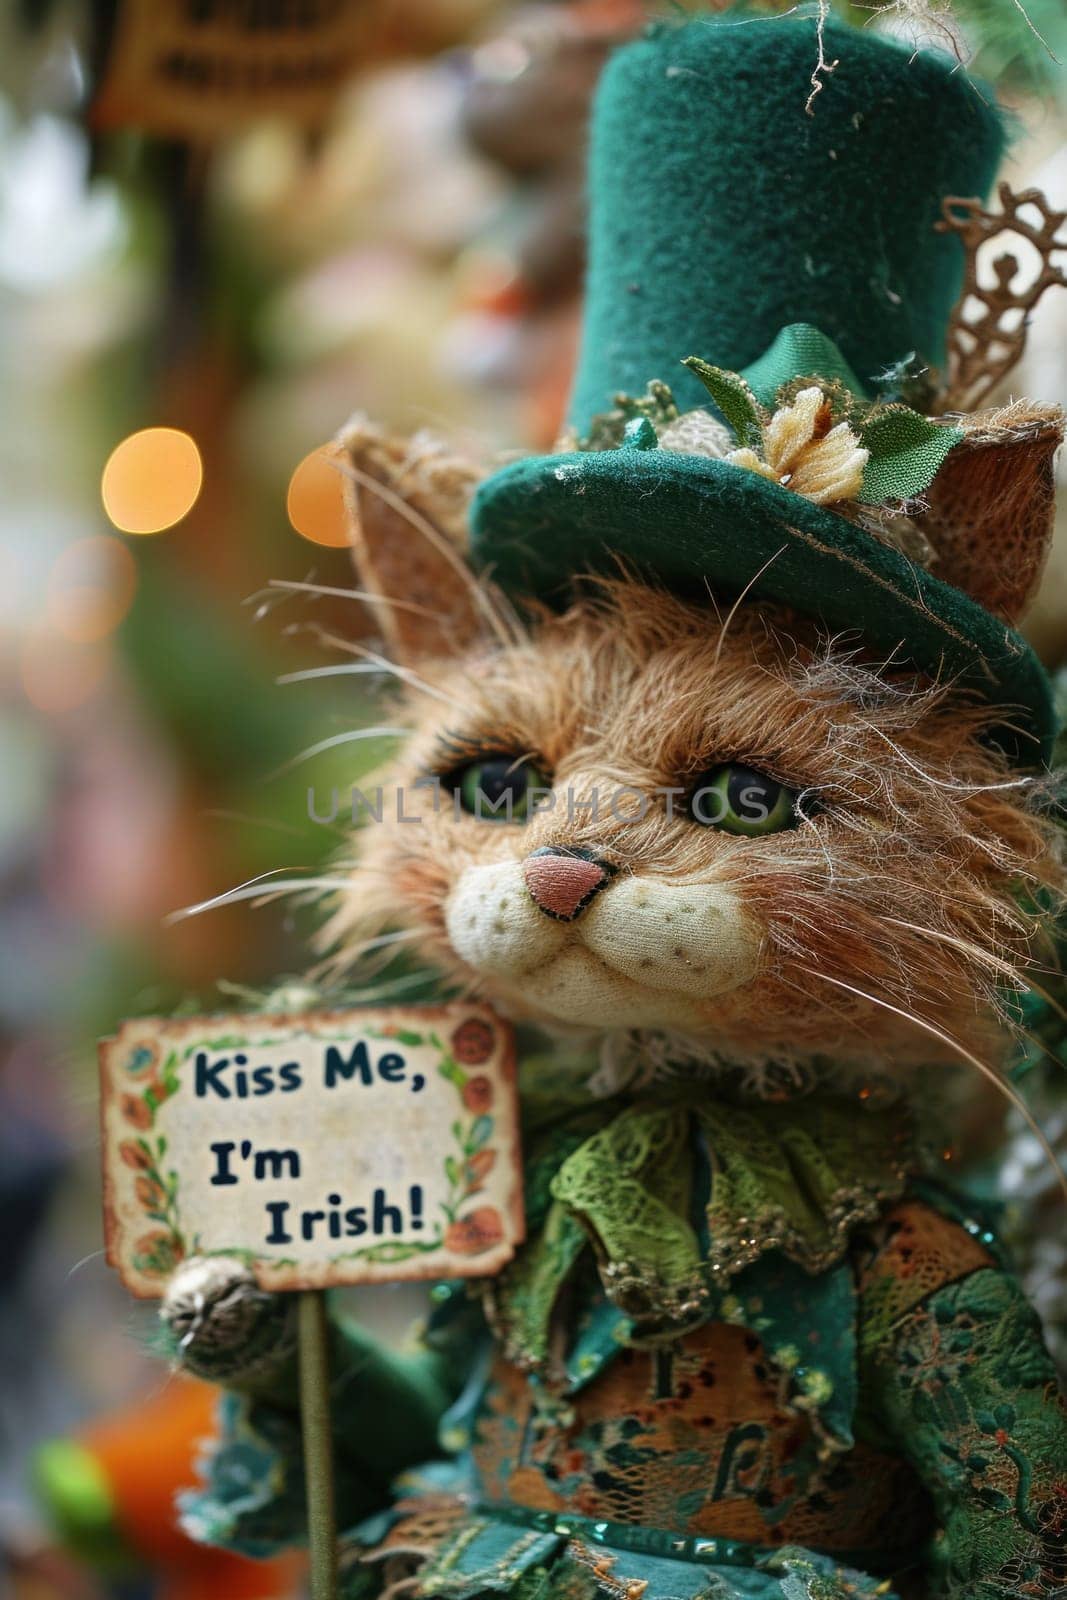 A cat dressed in a green hat and holding up an irish sign